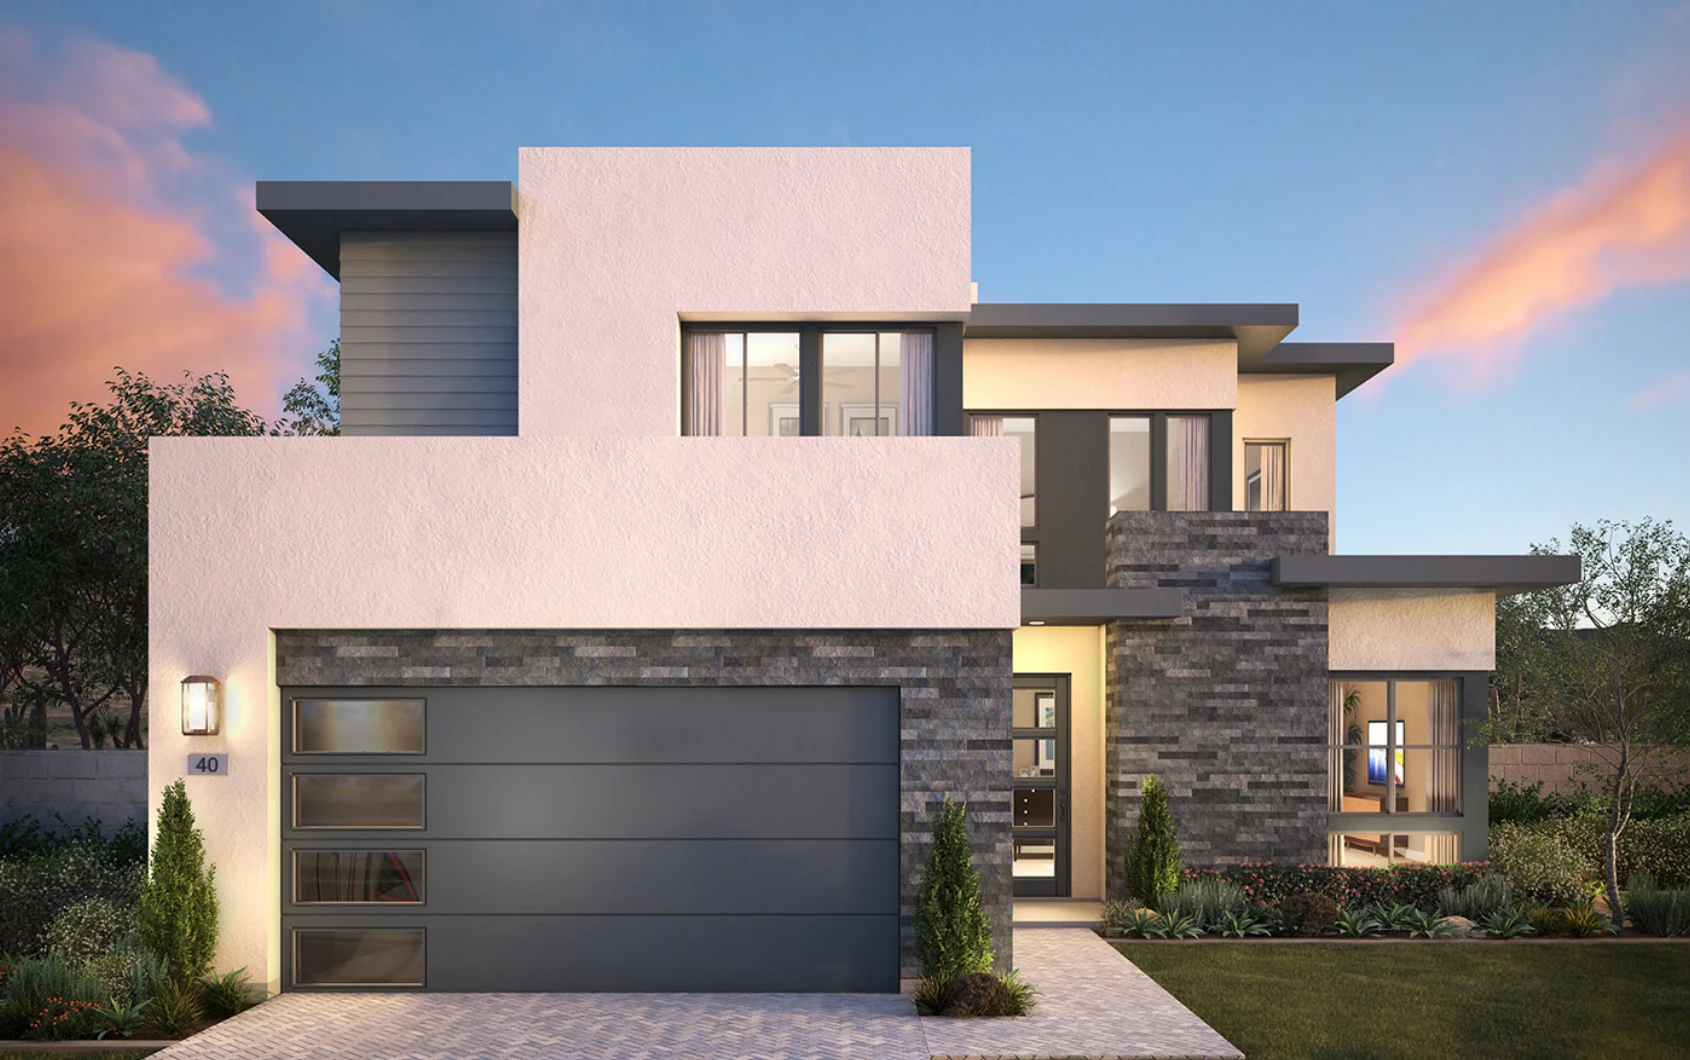 Modern style, 2-story home rendering